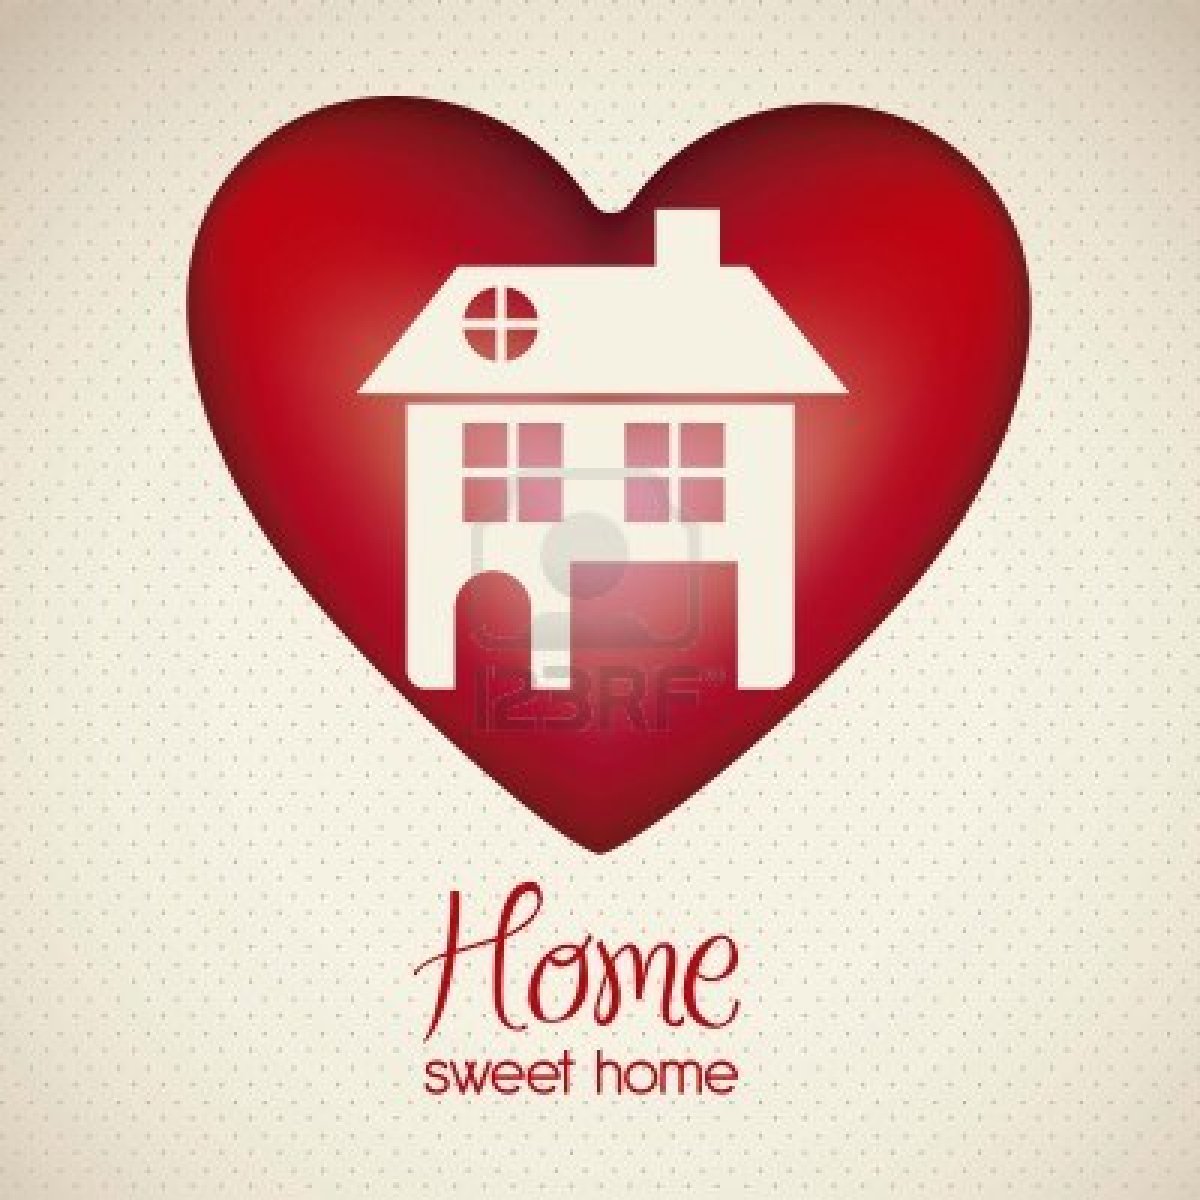 15794655-illustration-of-home-icon-on-heart-house-silhouettes-on-white-background-vector-illustration